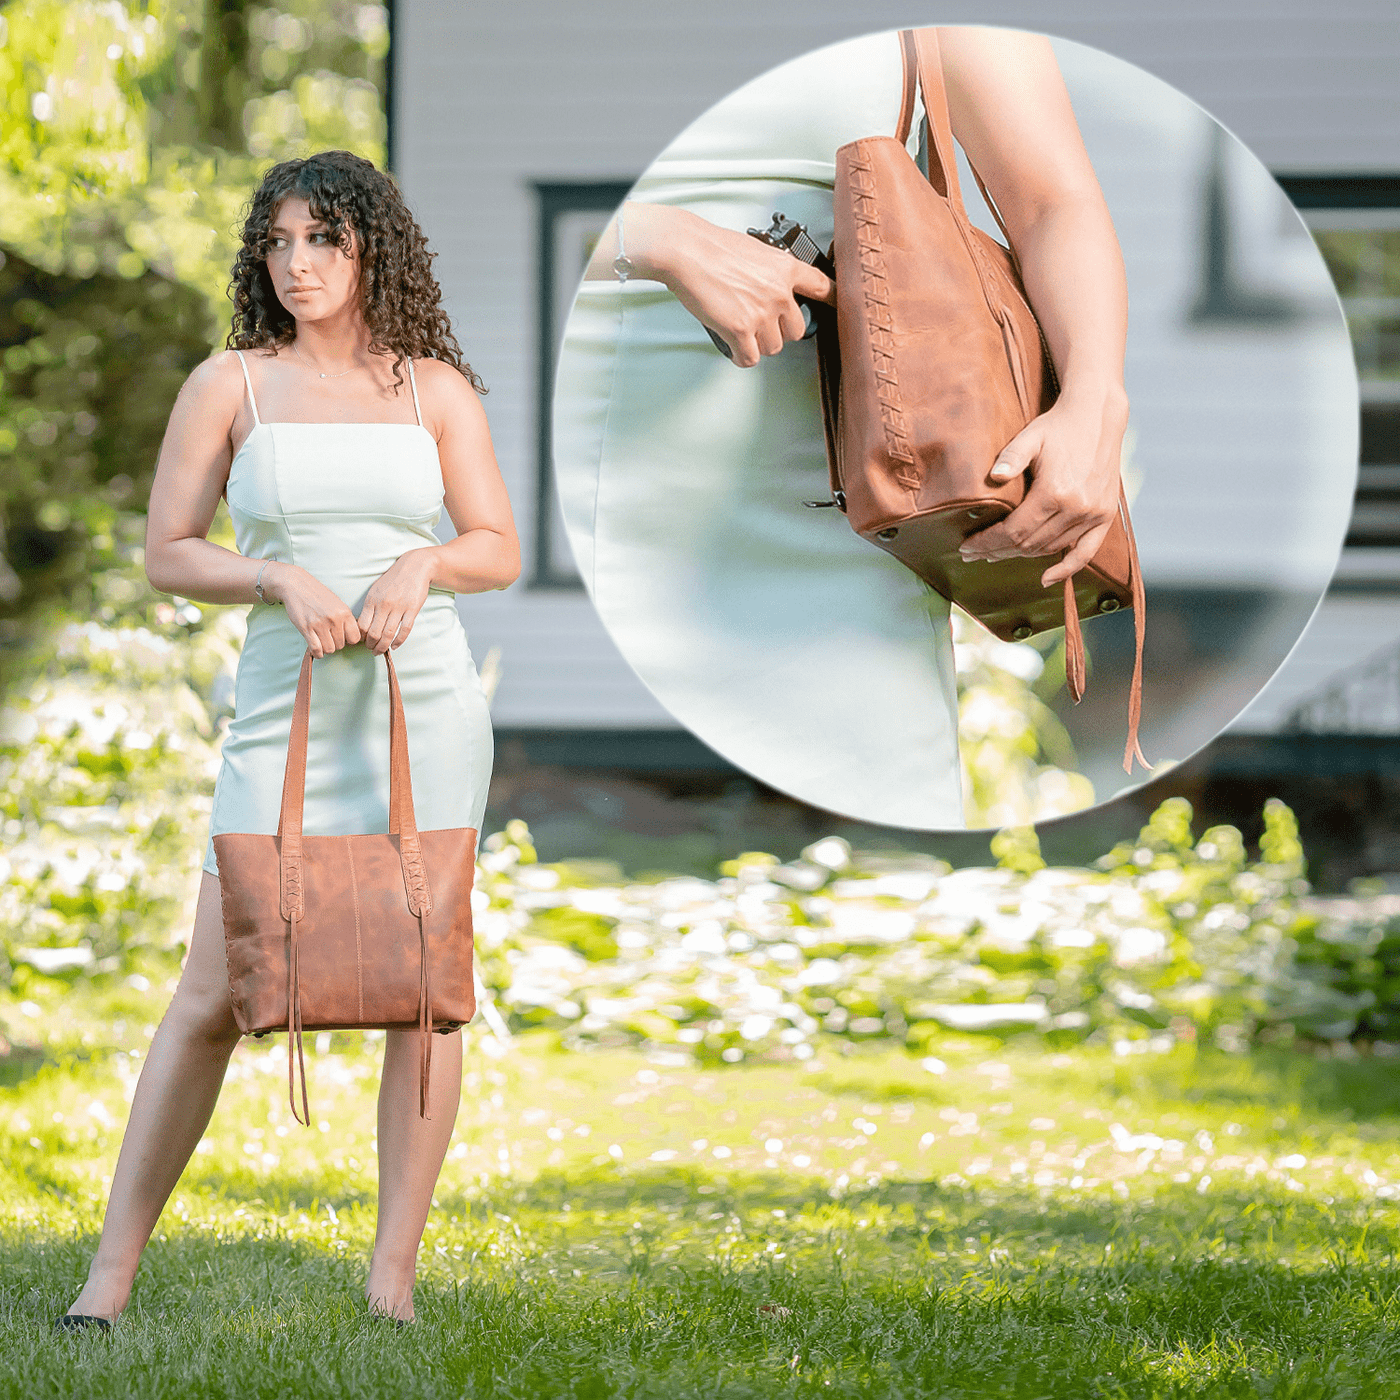 Concealed Carry Reagan Medium Leather Tote -  Lady Conceal -  Concealed Carry Purse -  Designer Luxury Leather Carry Handbag -  carry Handbag for gun carry -  Unique Tote gun Handbag -  designer backpack purse -  designer purse sale -  designer purse sales -  womens designer purse sale -  Peyton Leather Tote -  designer lady purse concealed carry gun Handbag -   concealed carry Handbag for woman-  Easy Conceal Carry and Draw Purse -